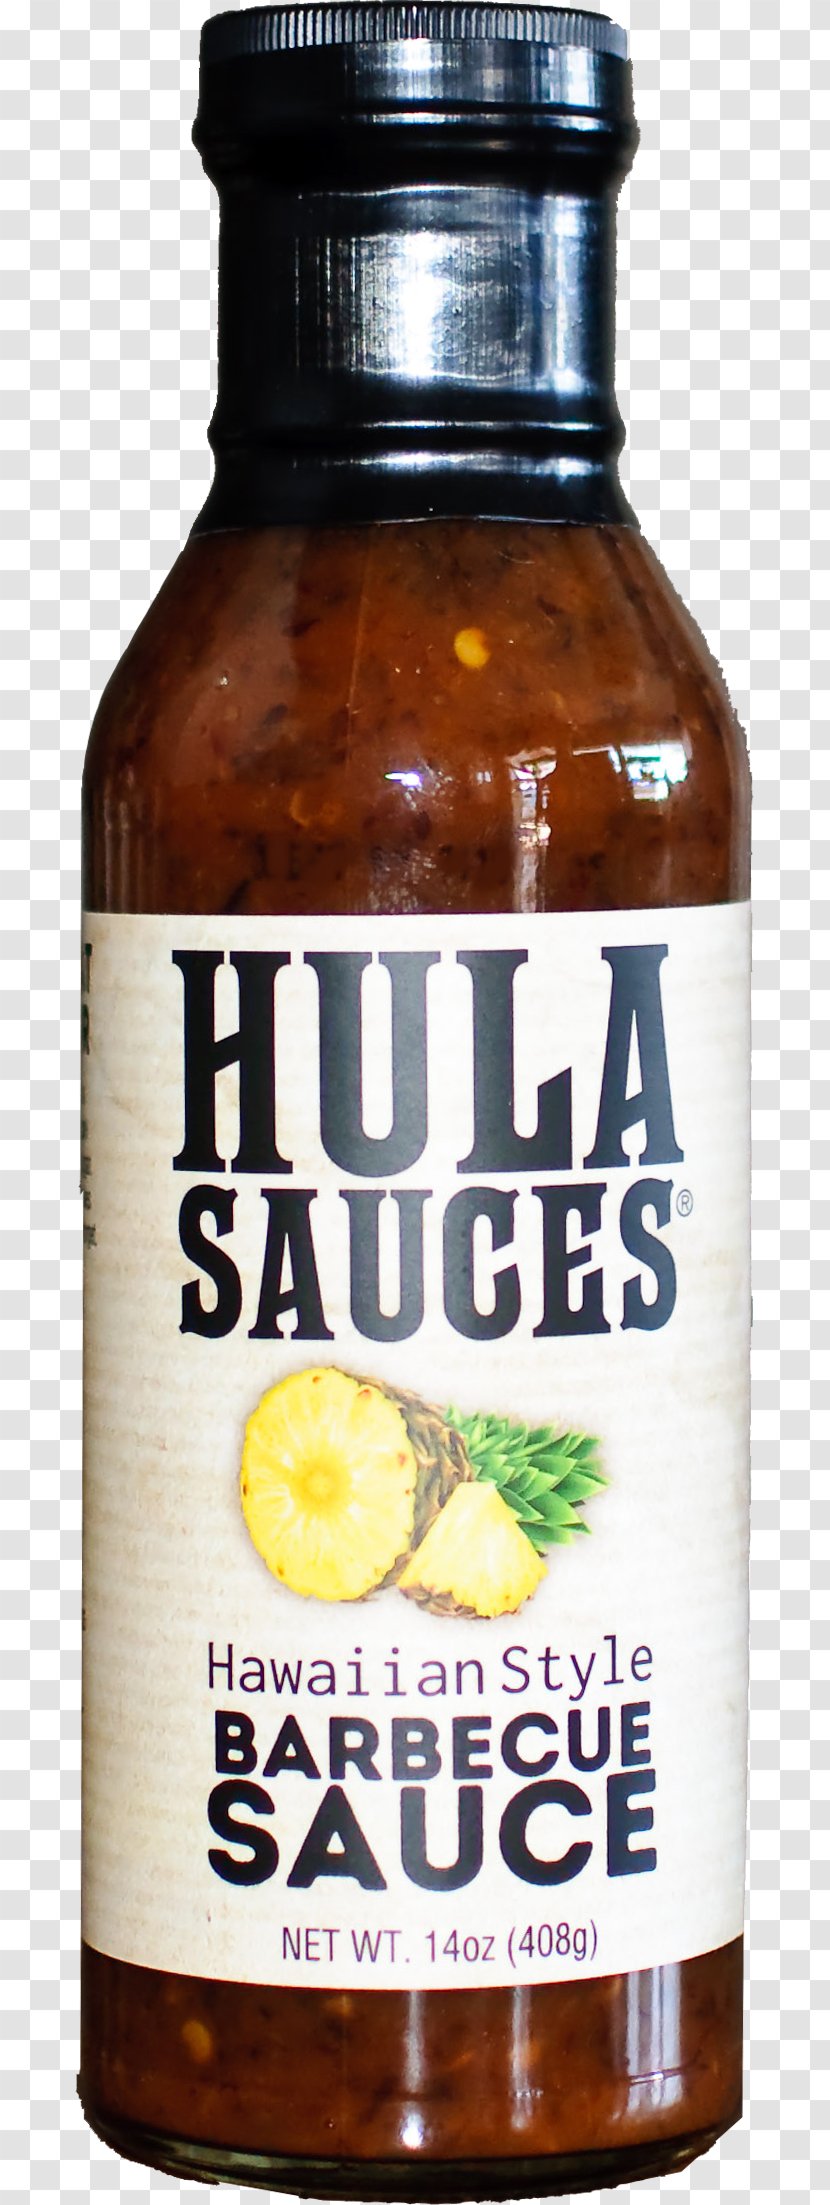 Barbecue Sauce Cuisine Of Hawaii Hula Restaurant And Co. Ribs Transparent PNG